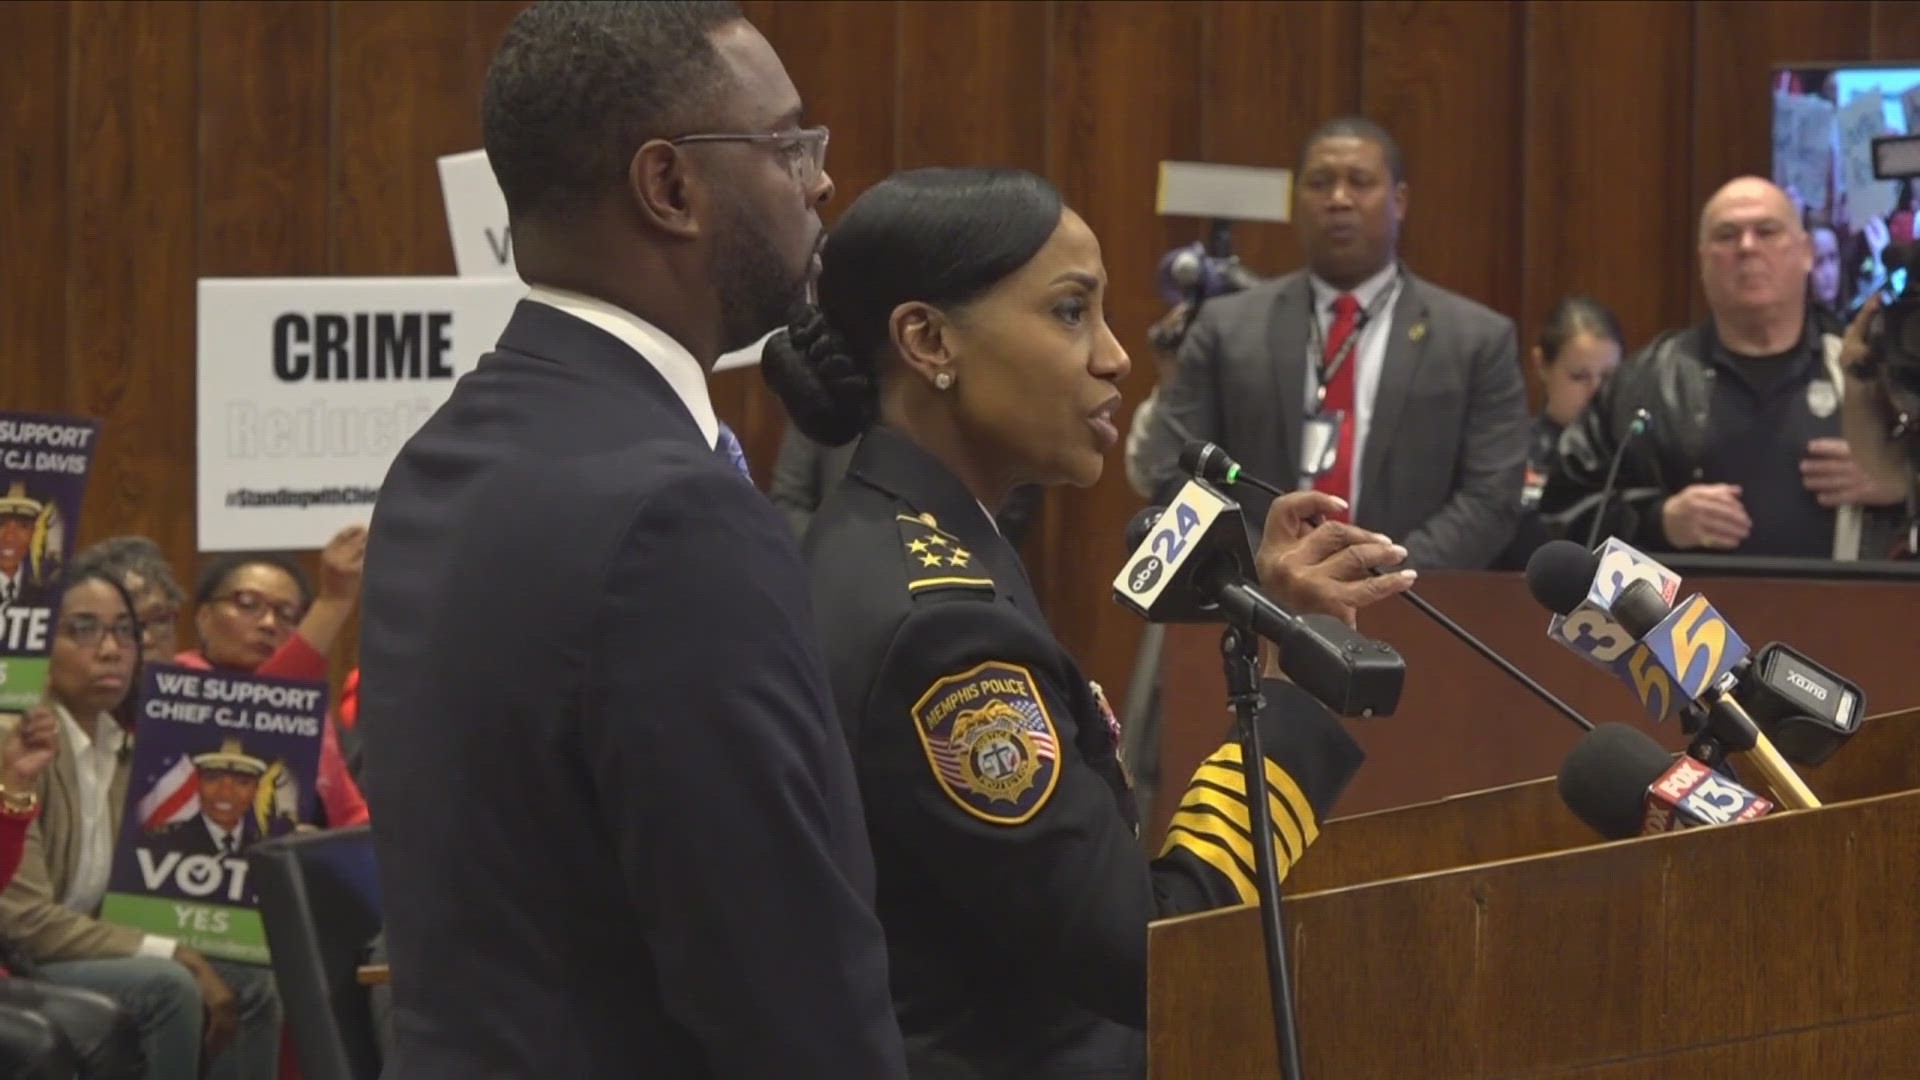 “We want to see if Chief Davis can rebuild trust in the community," Memphis City Council Chairman JB Smiley said.